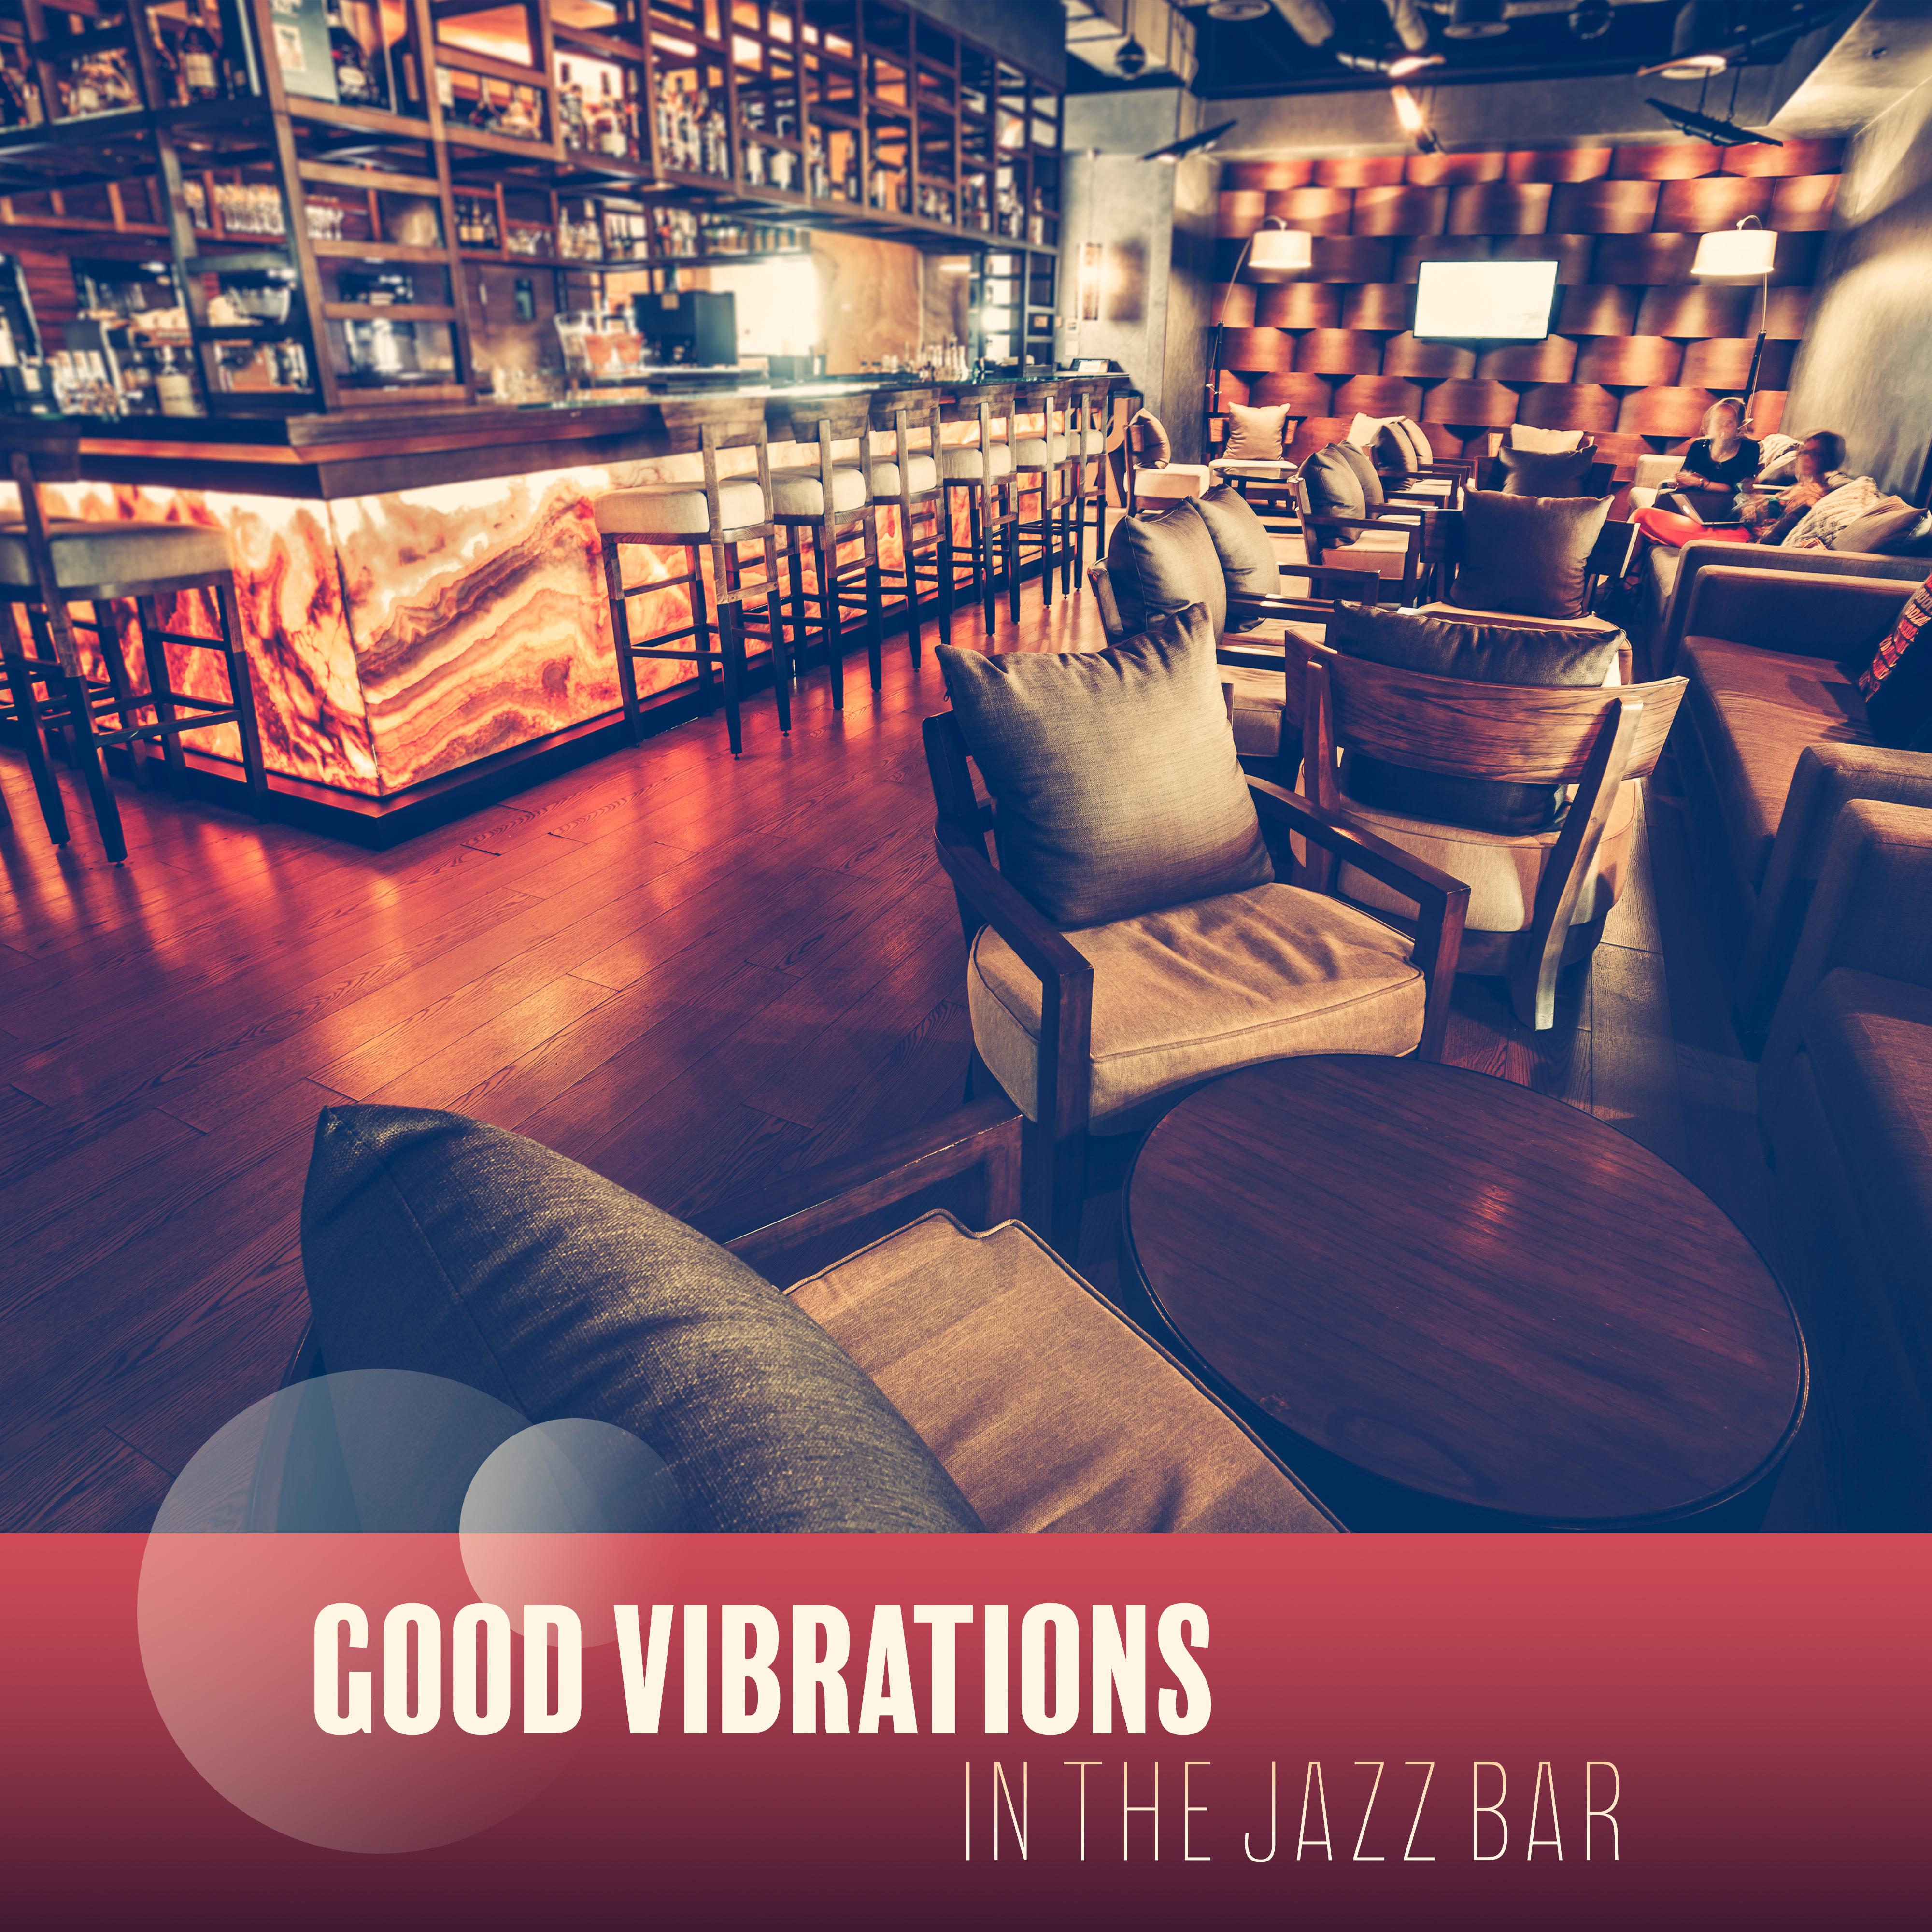 Good Vibrations in the Jazz Bar: 2019 Instrumental Smooth Jazz Music for Jazz Club, Bar or Oldschool Cafe, Vintage Styled Positive Songs with Classic Sounds of Piano, Contrabass, Sax & Many More